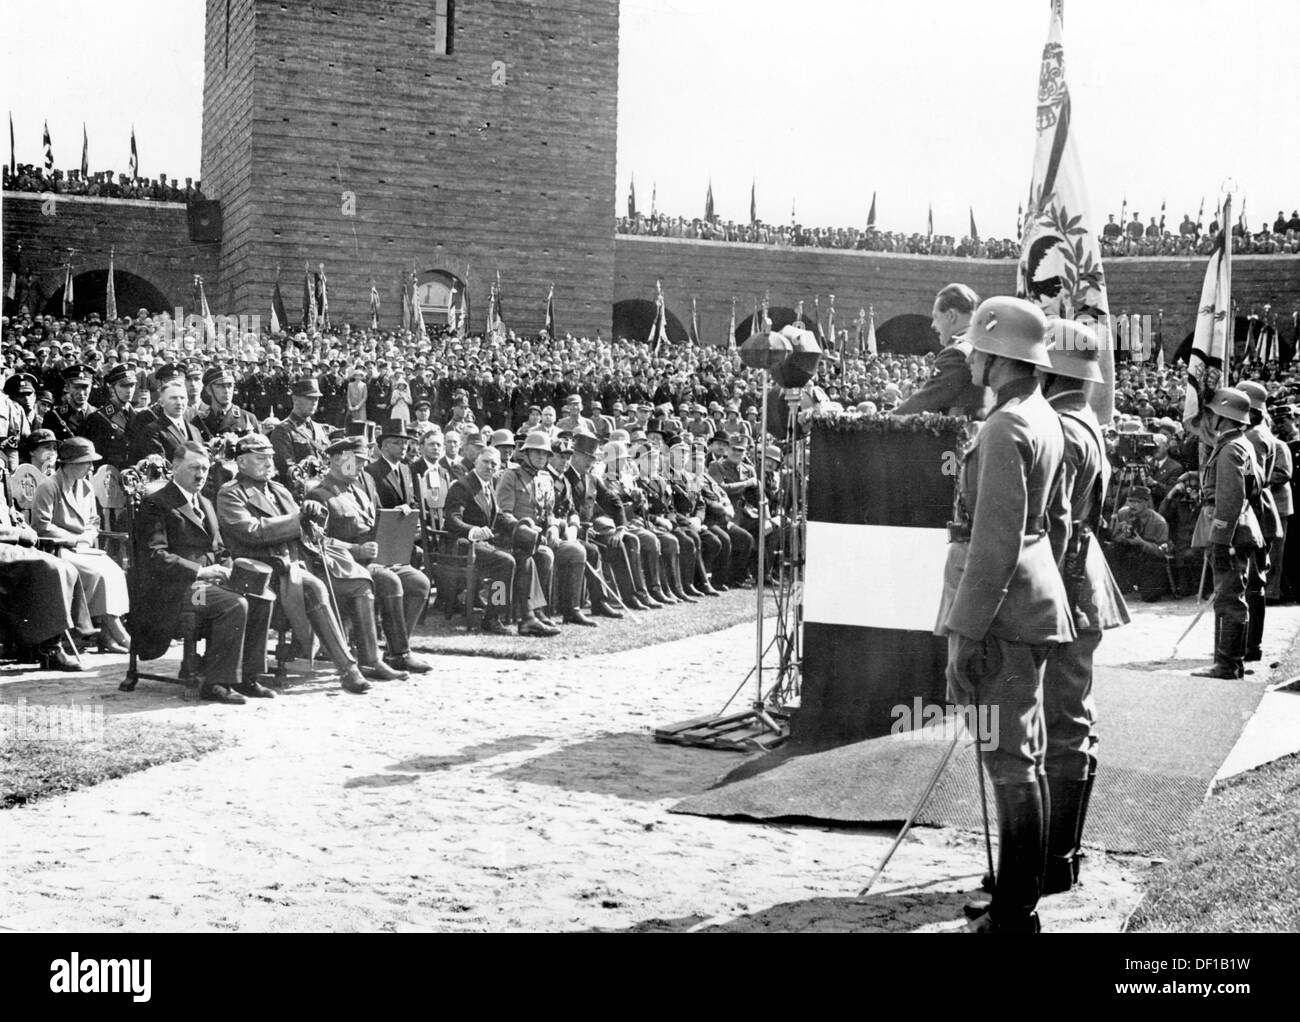 The image from the Nazi Propaganda! shows Reich Chancellor Adolf HItler during the commemoration at Tannenberg Memorial on 27 August 1933. The speech is delivered by the NSDAP Gauleiter of East Prussia, Erich Koch. In the first row (l-r): Adolf Hitler, Reich President Paul von Hindenburg, Minister President Hermann Göring, Vice Chancellor Franz von Papen, Reich Minister of War Werner von Blomberg and the leader of the Naval High Command Erich Raeder. Fotoarchiv für Zeitgeschichte Stock Photo